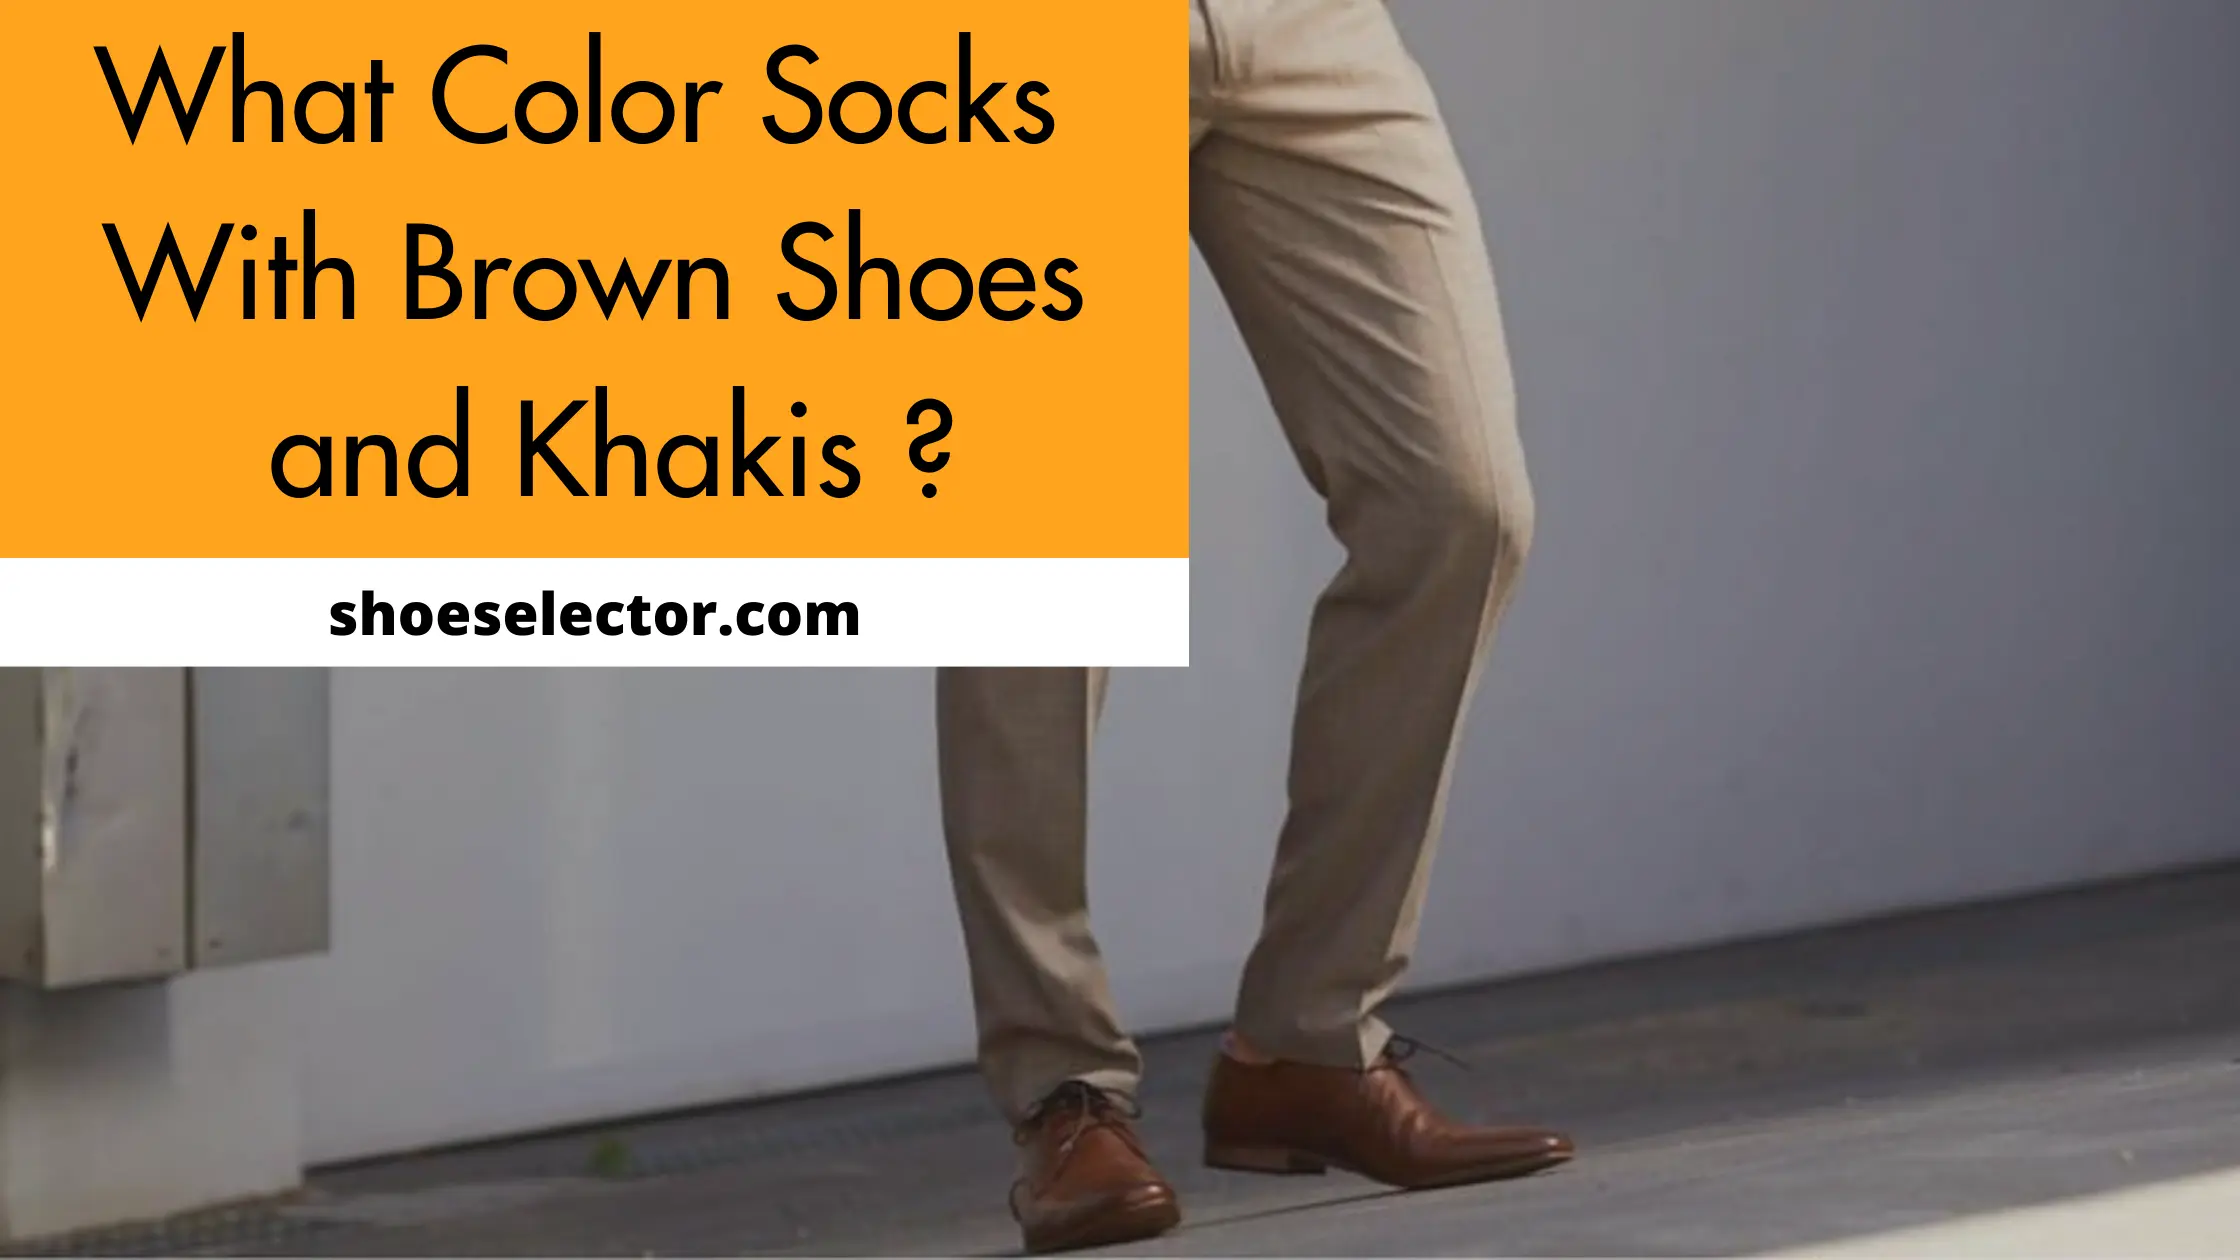 What Color Socks With Brown Shoes And Khakis?